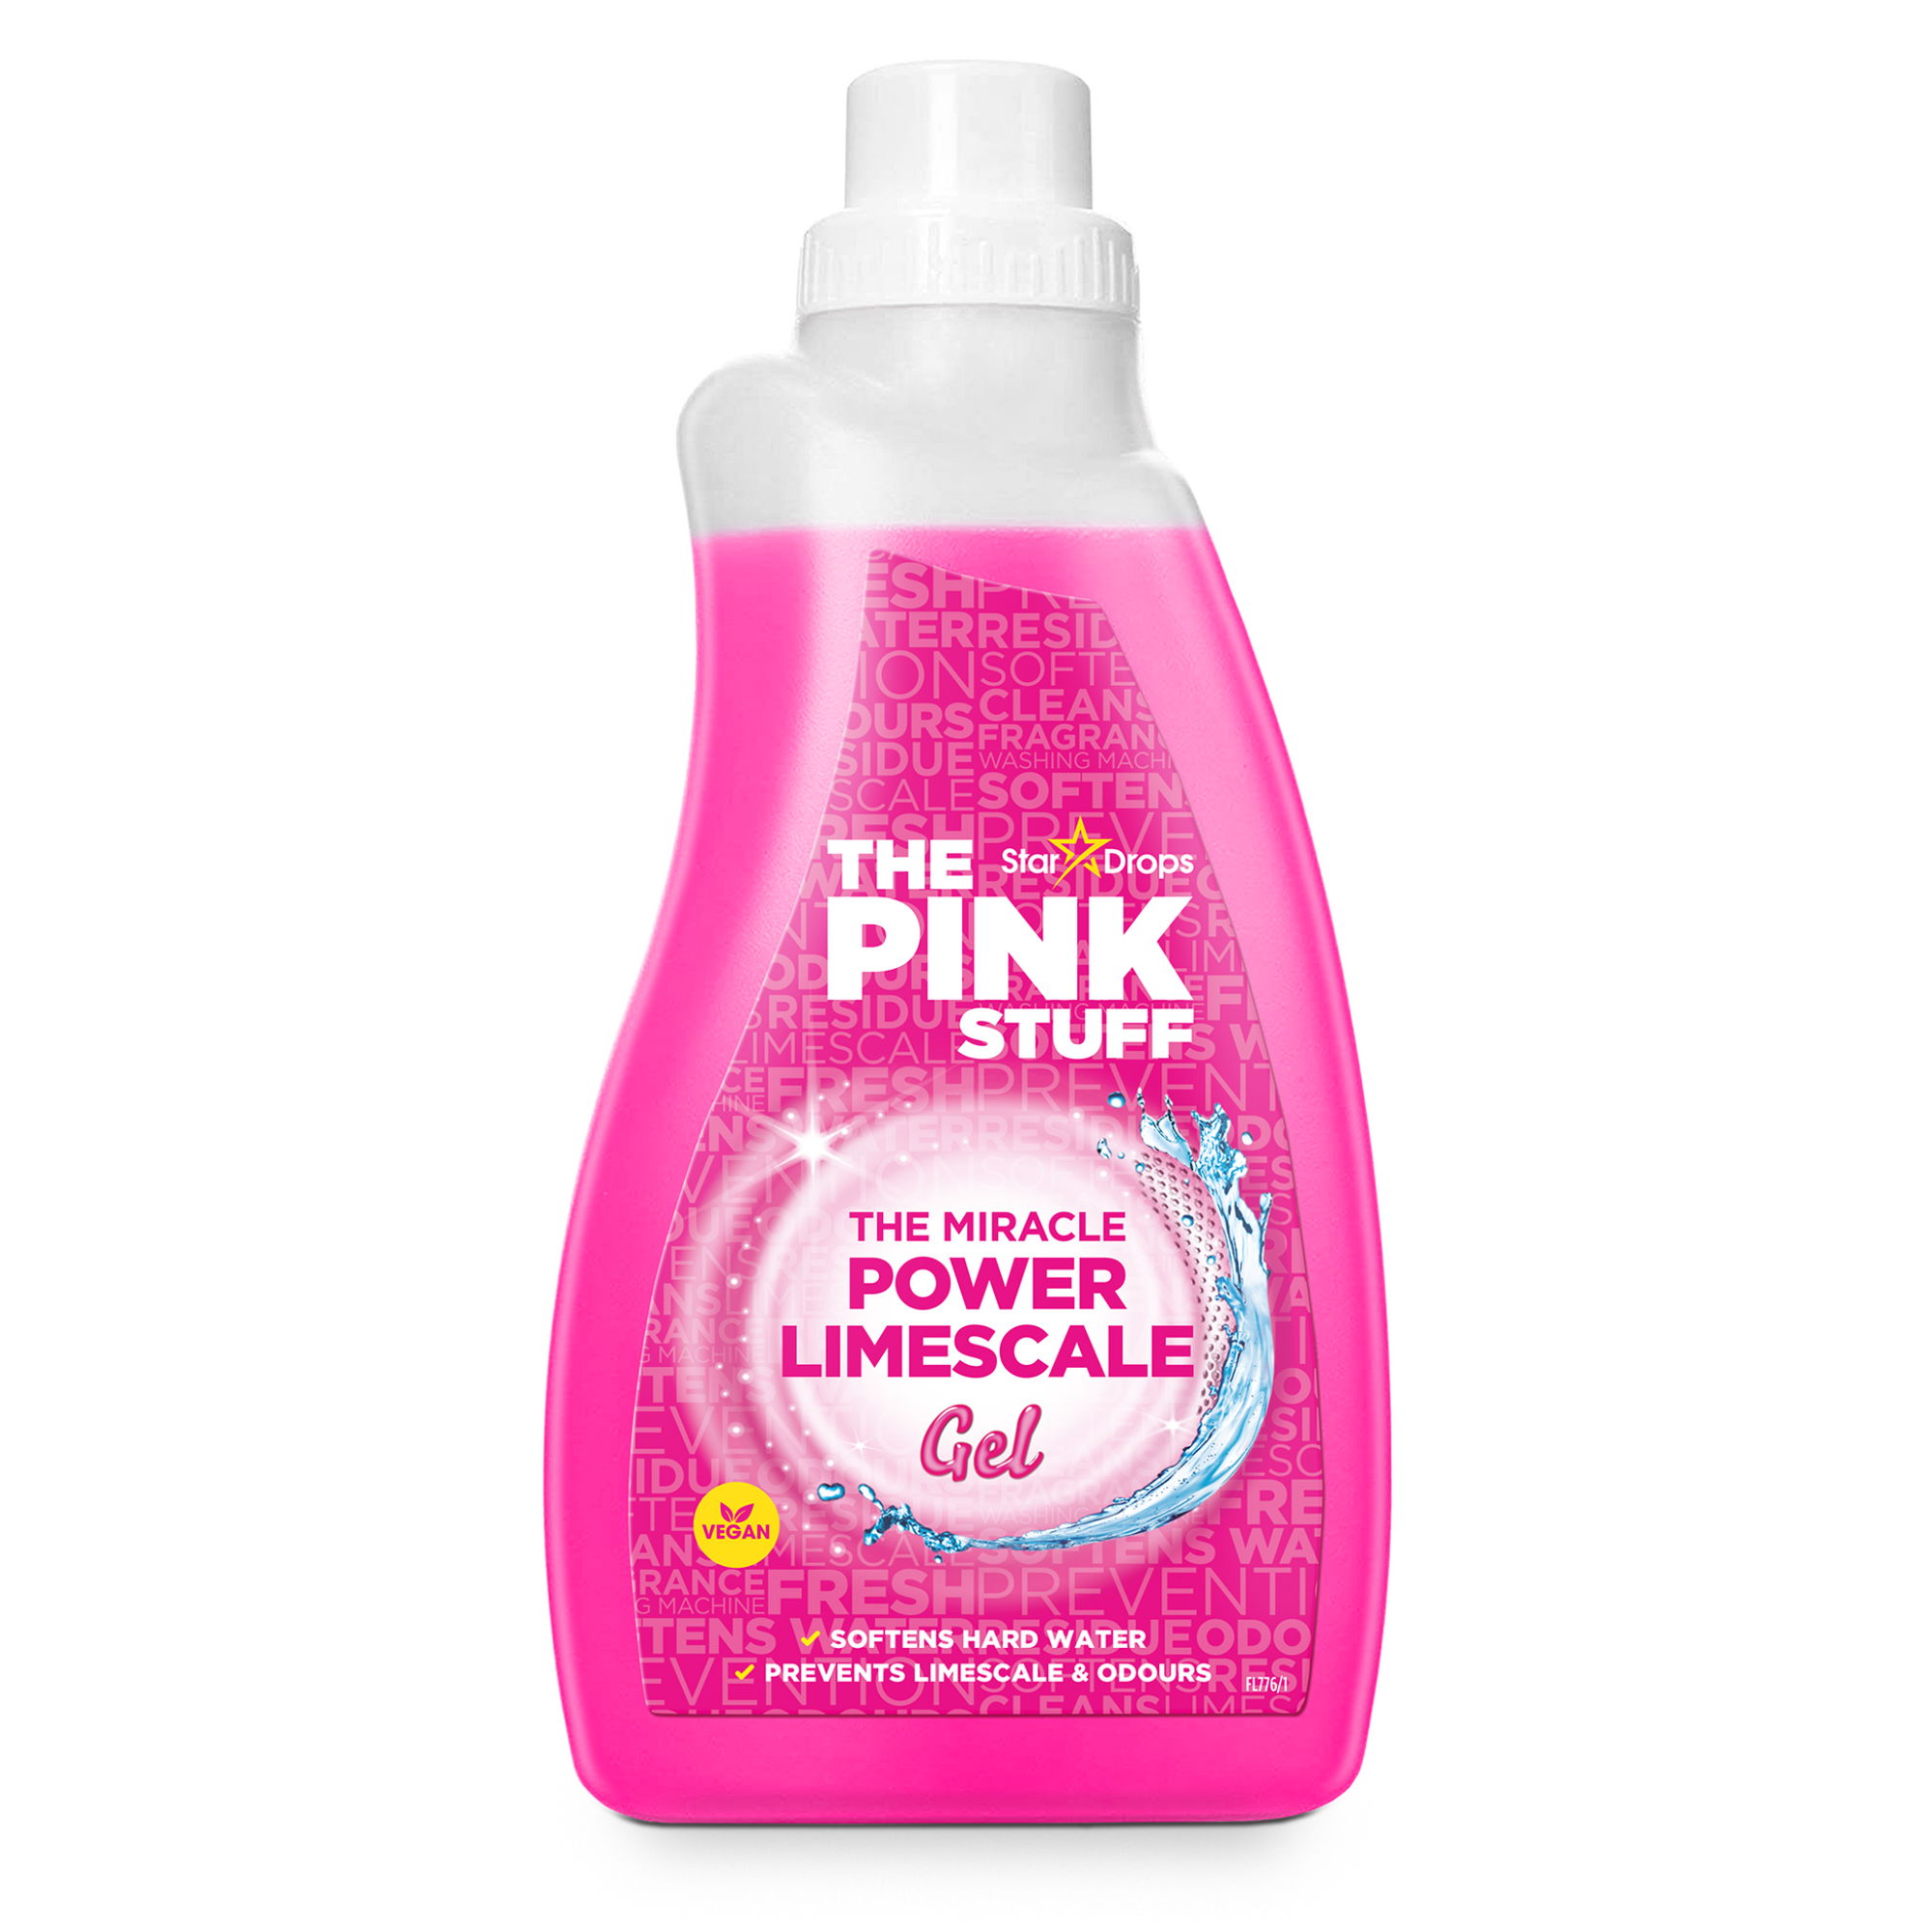 Disinfectant Cleaner - The Pink Stuff